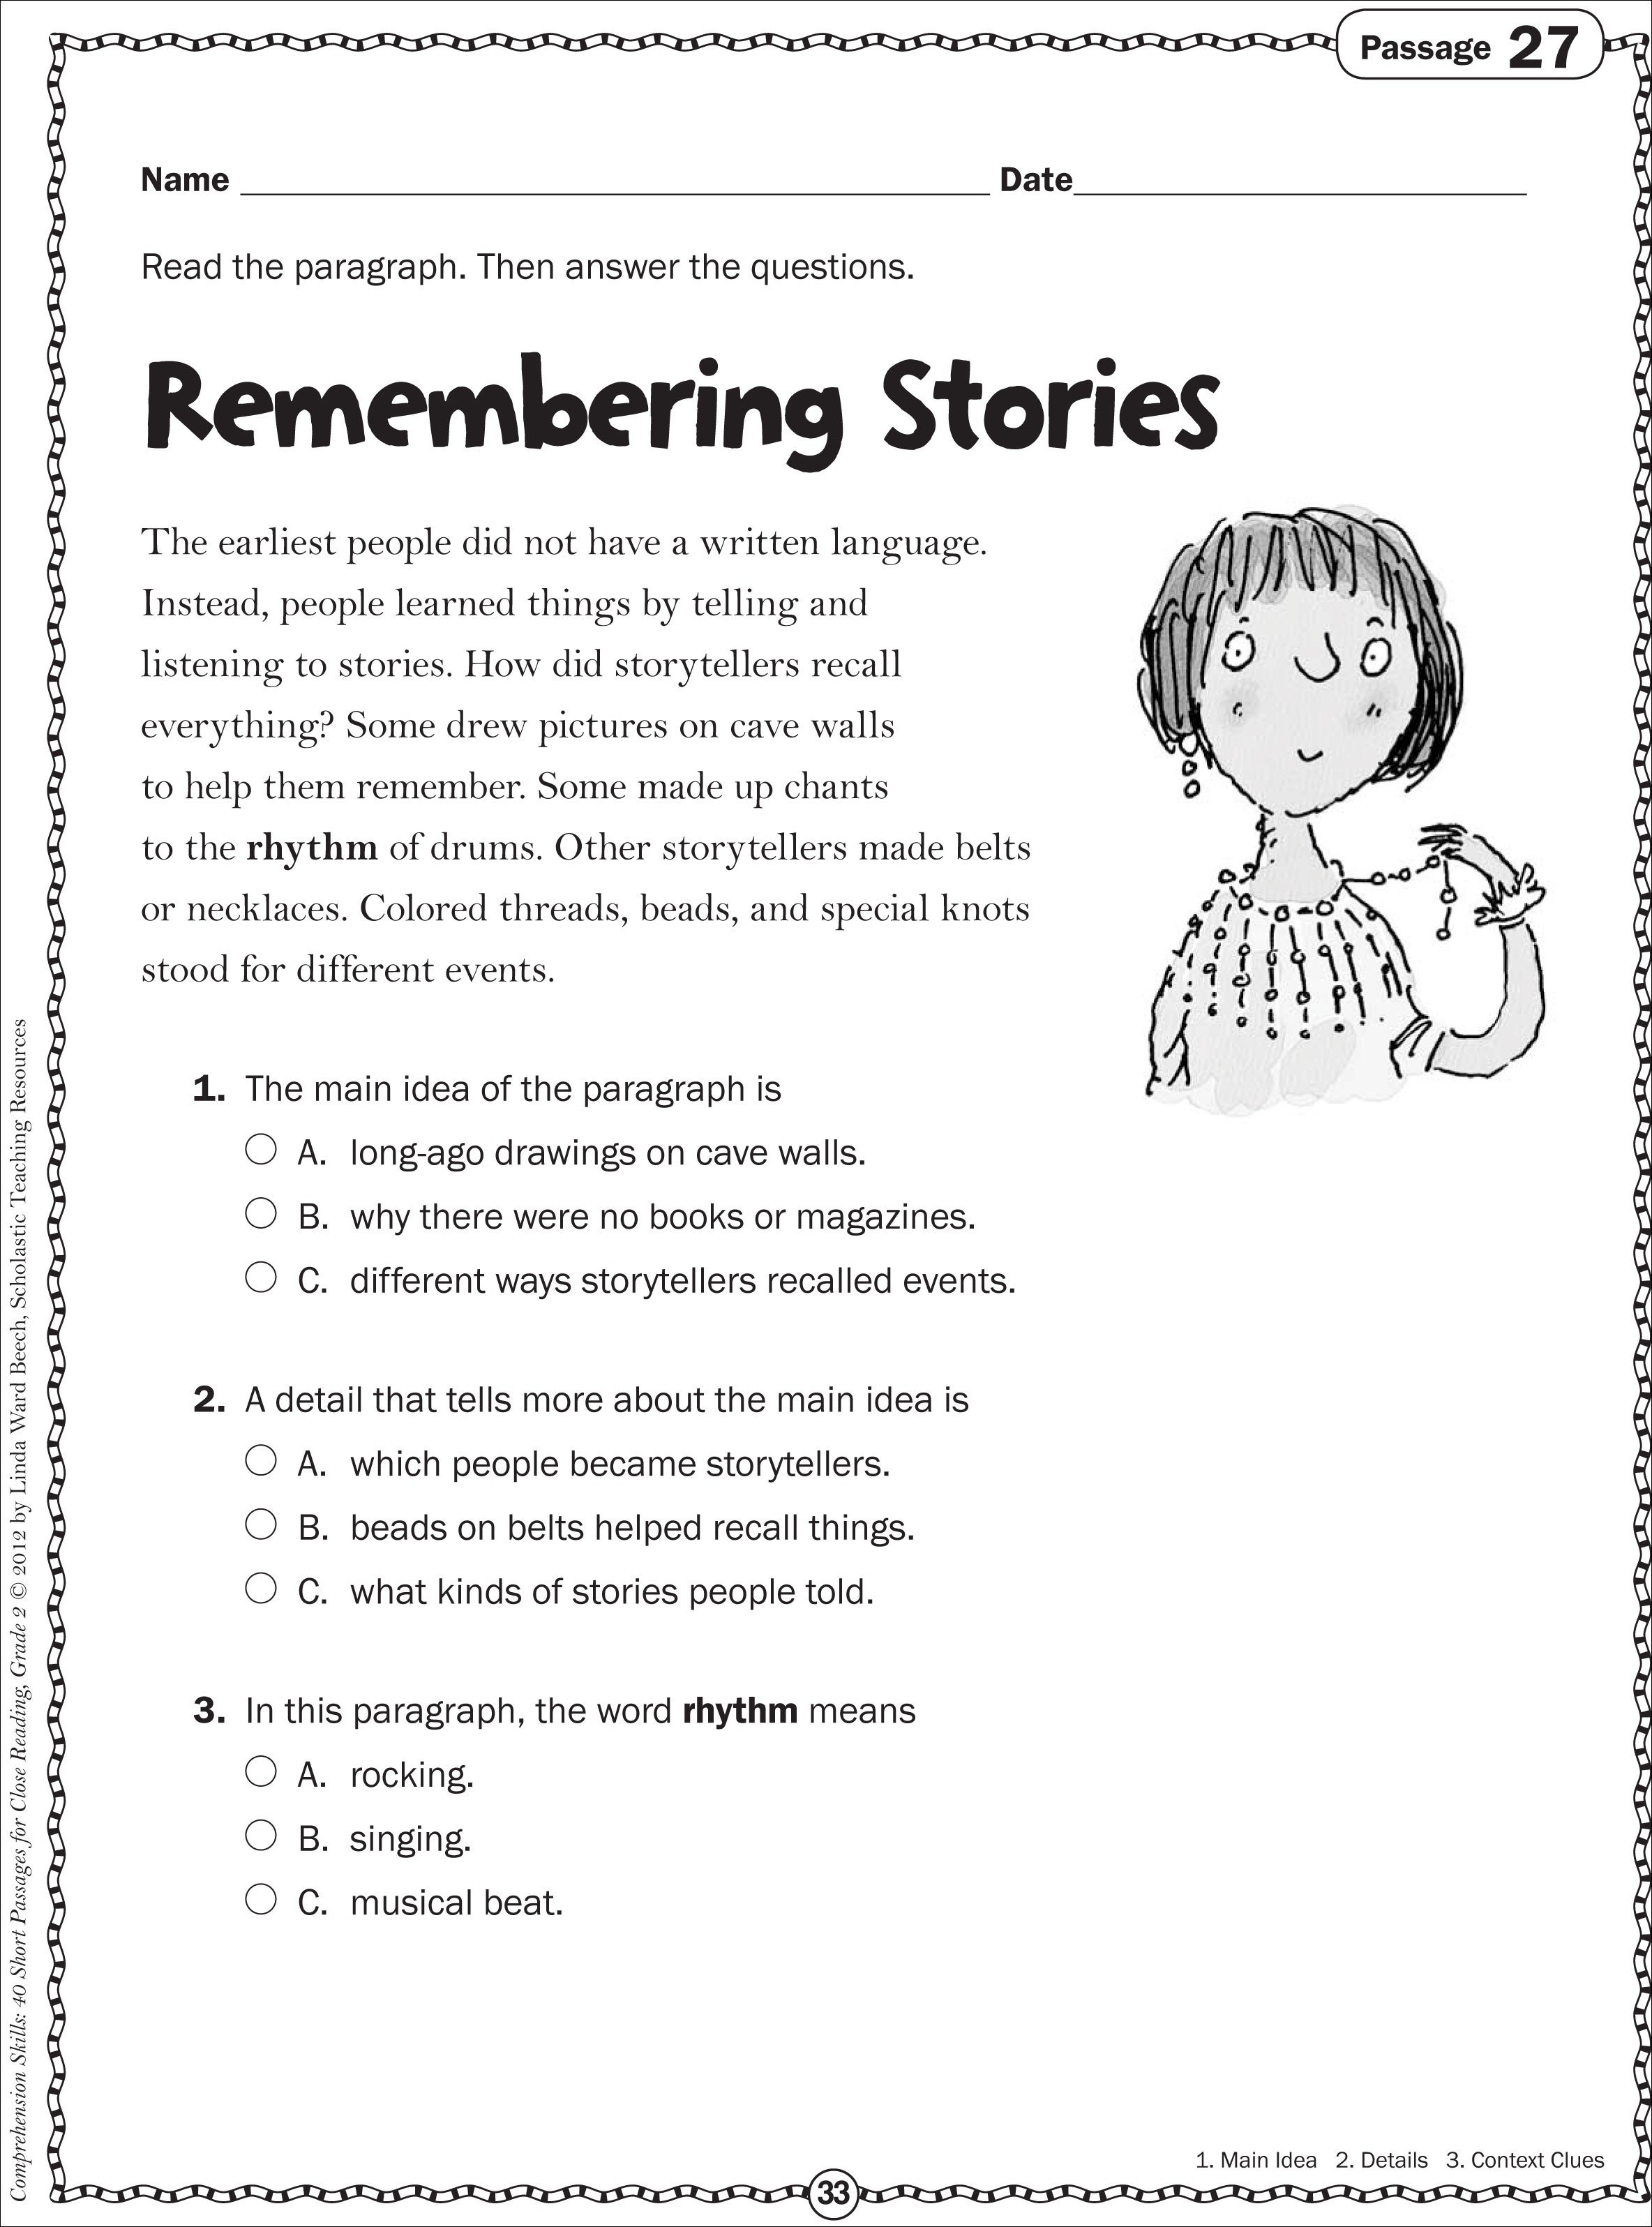 reading-comprehension-passages-5th-grade